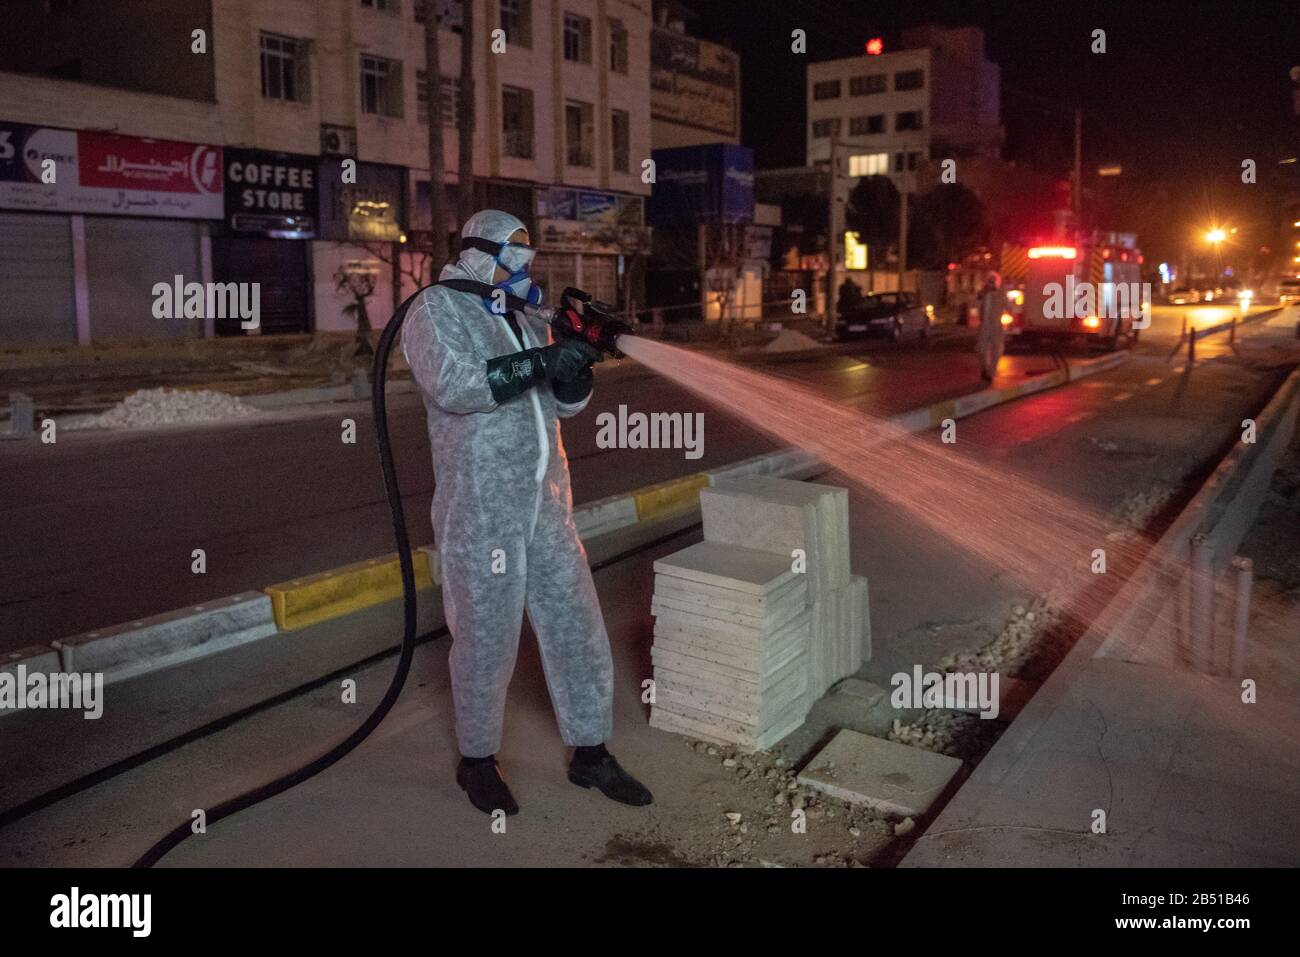 Disinfection of public places and thoroughfares in Shiraz, Afif-Abaad St. is underway with the aim of preventing and combating outbreak of Coronavirus(COVID-19). For this purpose, experts of health ministry have cooperated with the provincial fire department and disinfect the city in late hours of the night using machinery and mobile pumps. Iran, Fars province, Shiraz city. Stock Photo